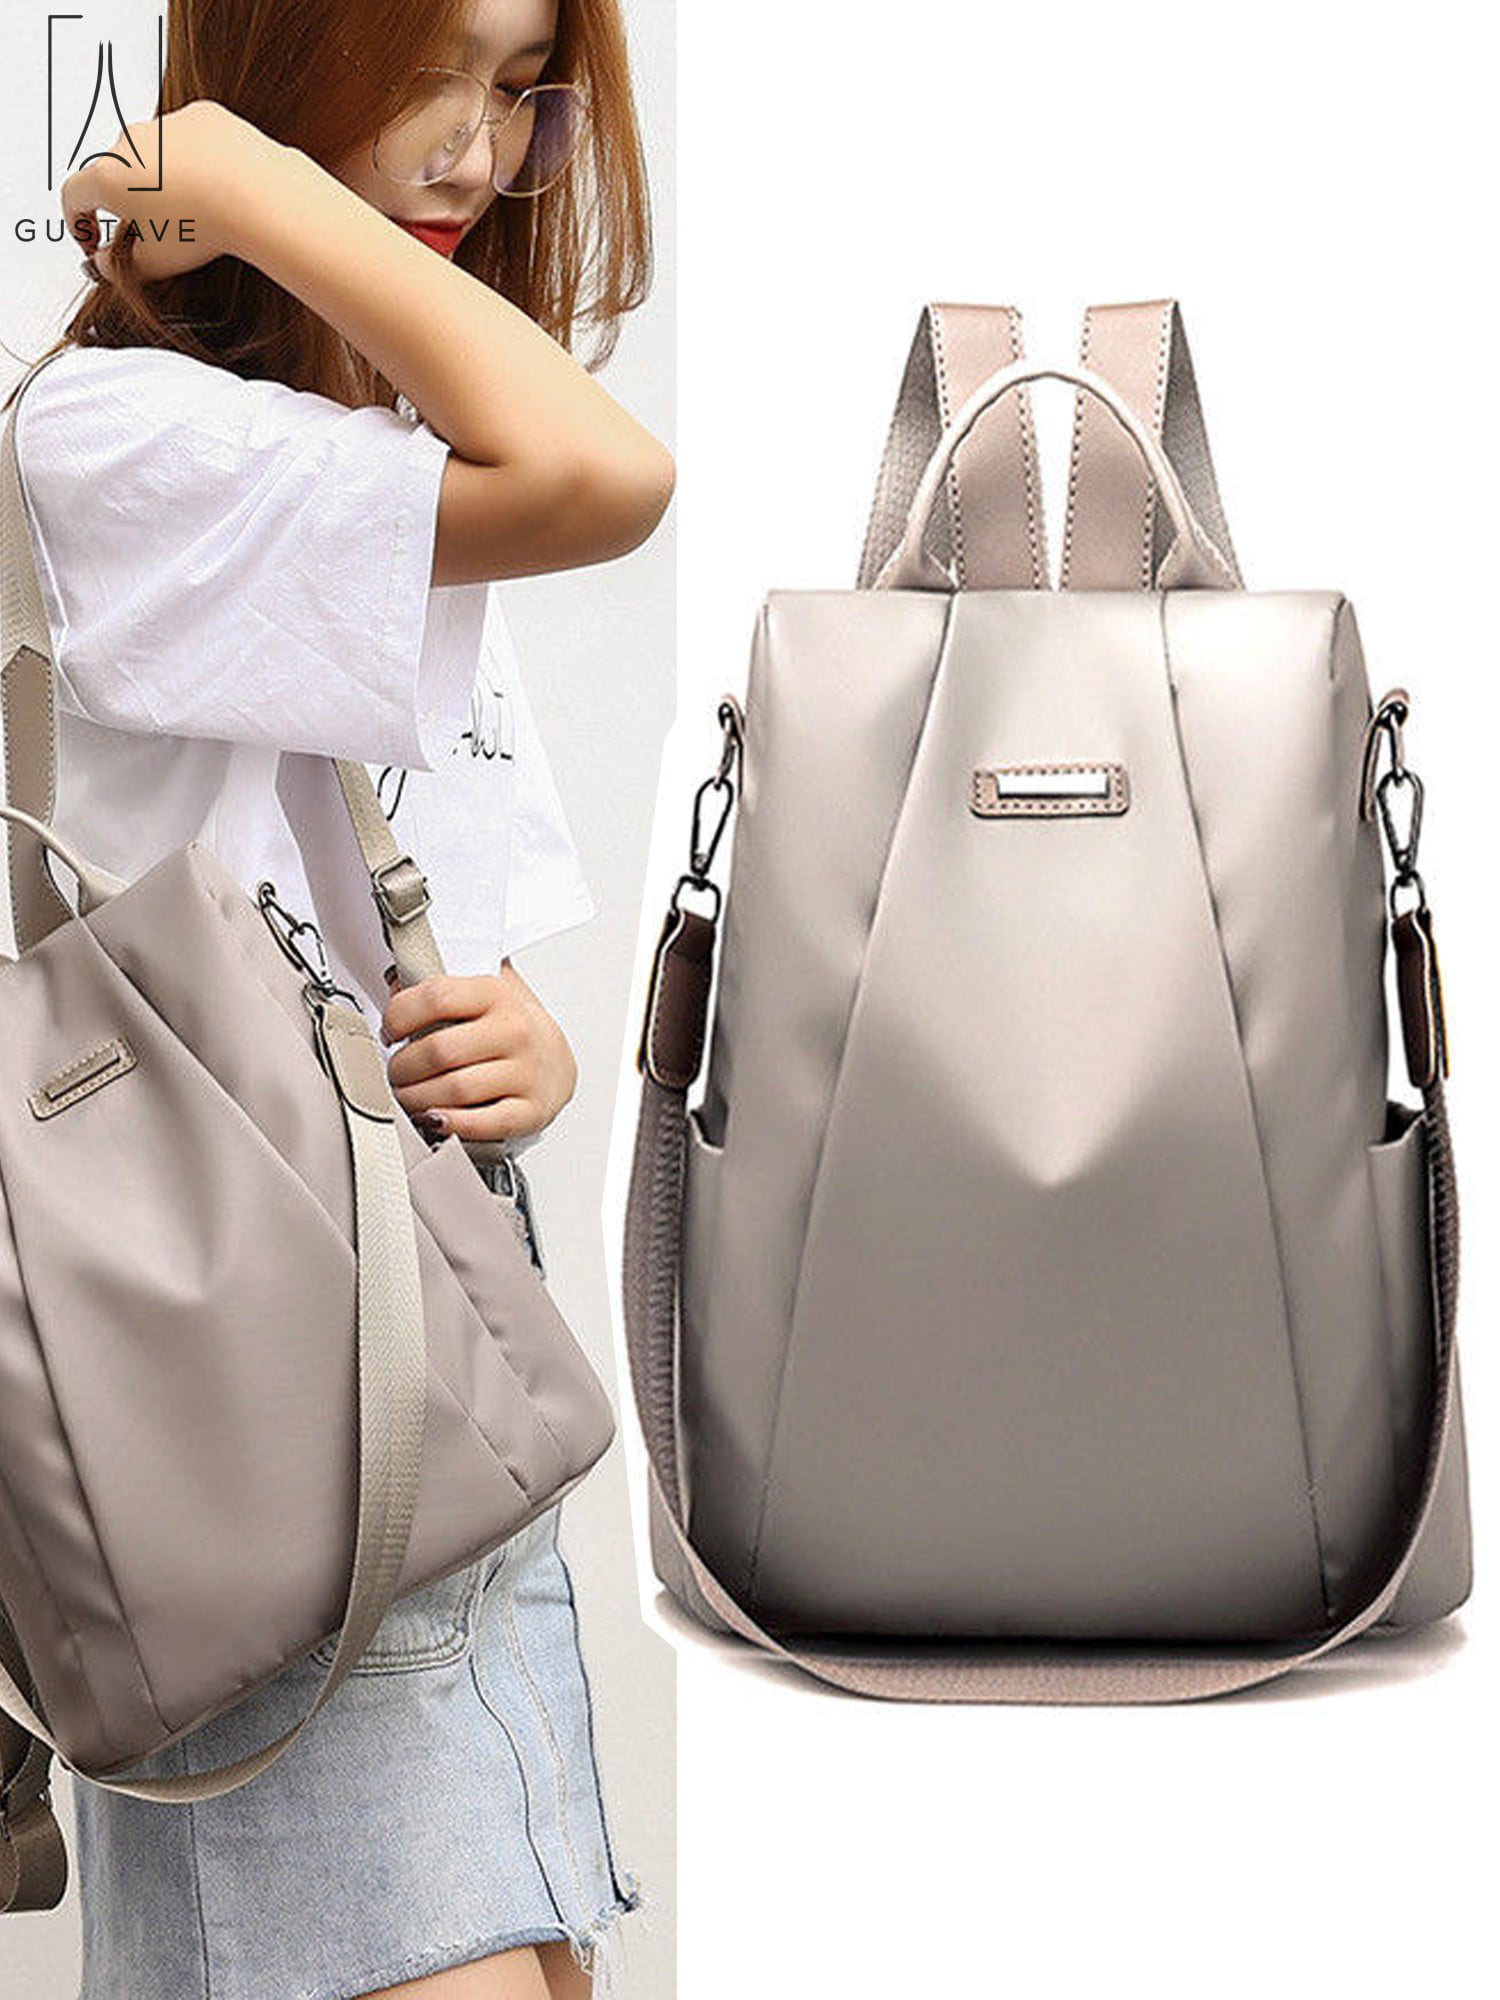 Gustave - GustaveDesign Women Backpack Waterproof Oxford Cloth Anti ...